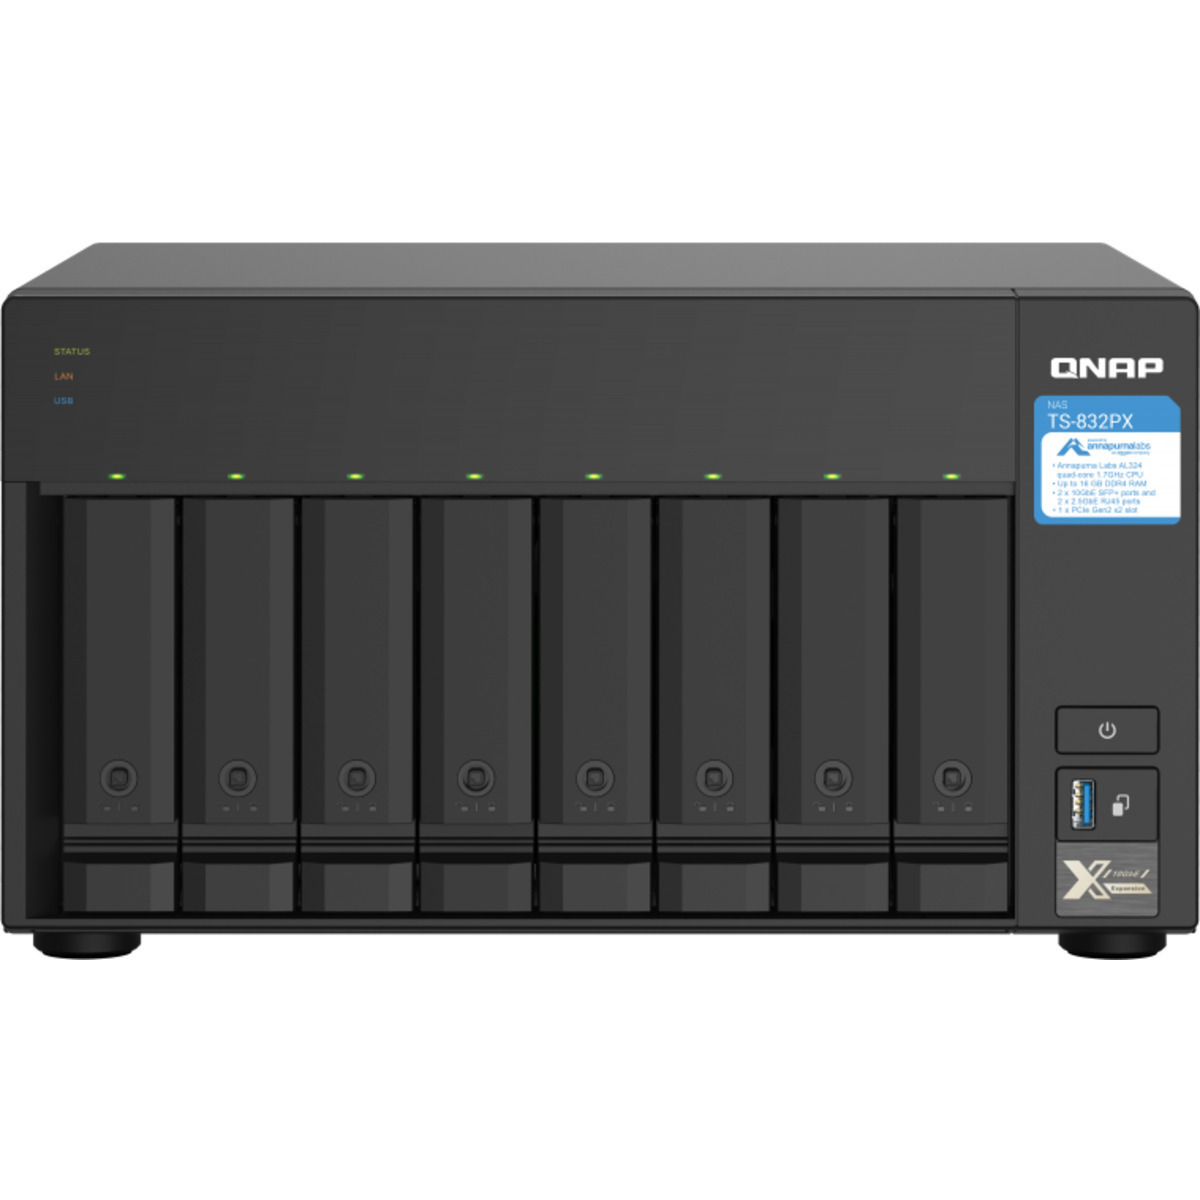 QNAP TS-832PX 36tb 8-Bay Desktop Multimedia / Power User / Business NAS - Network Attached Storage Device 6x6tb Western Digital Gold WD6003FRYZ 3.5 7200rpm SATA 6Gb/s HDD ENTERPRISE Class Drives Installed - Burn-In Tested - FREE RAM UPGRADE TS-832PX